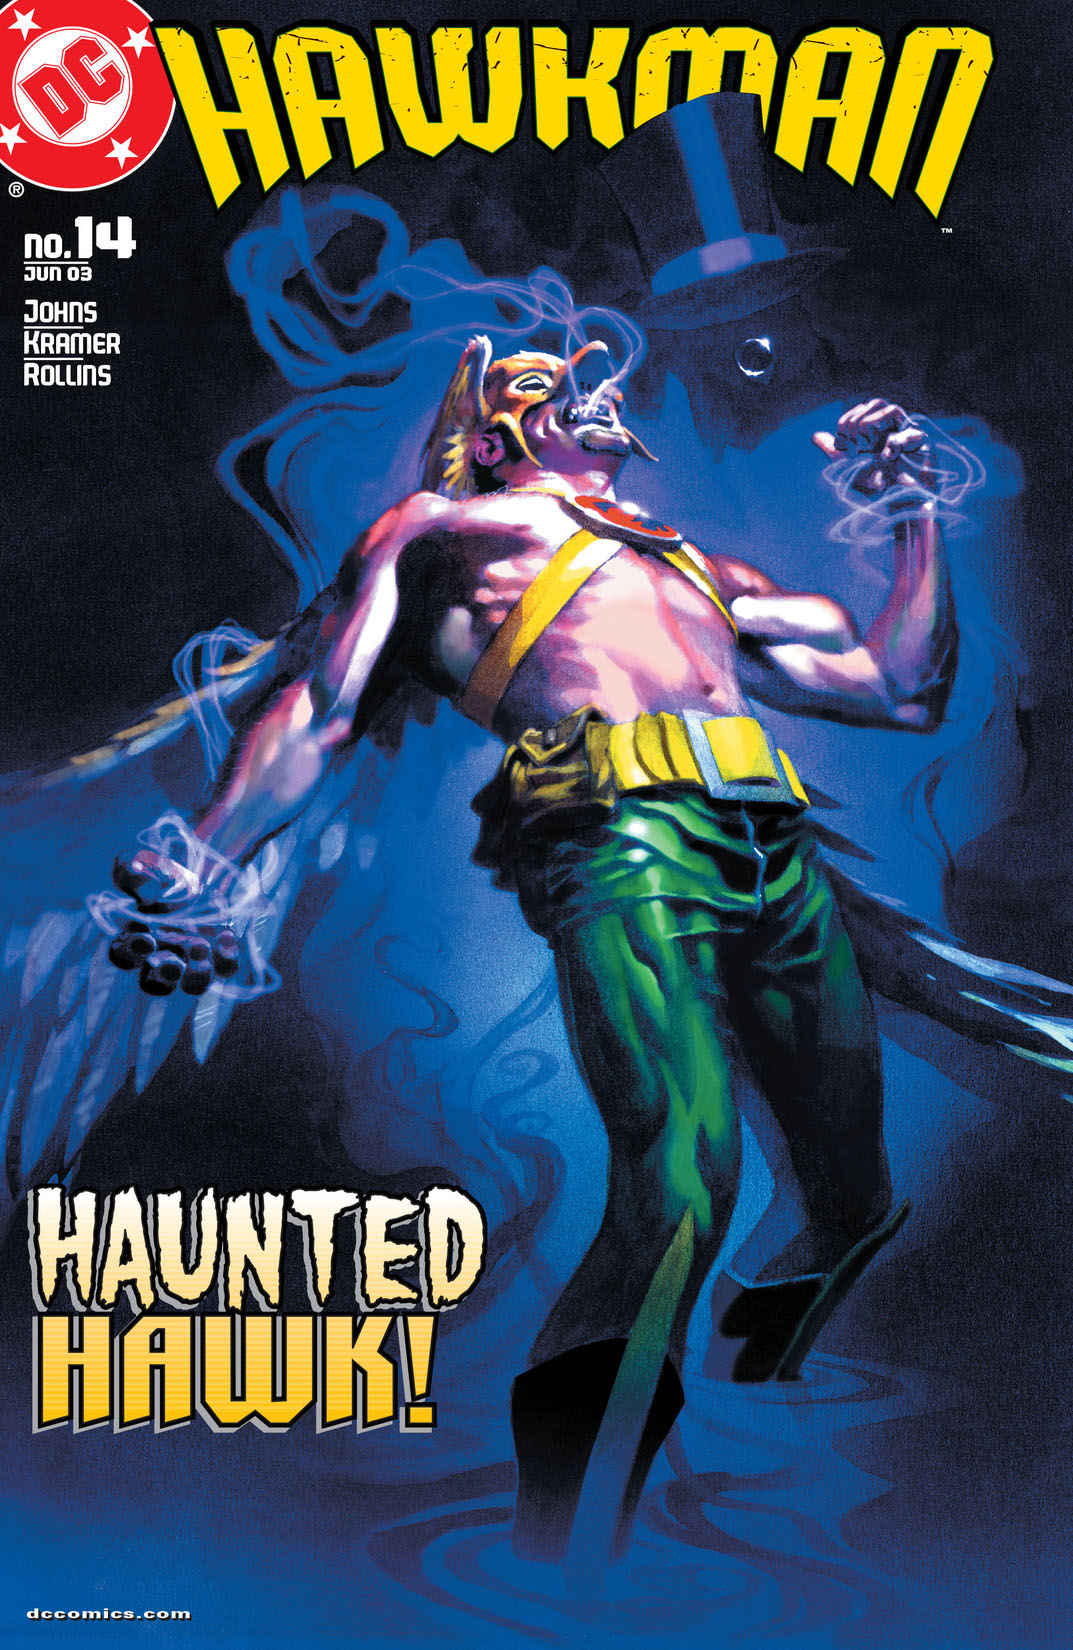 Hawkman (2002-) #14 preview images